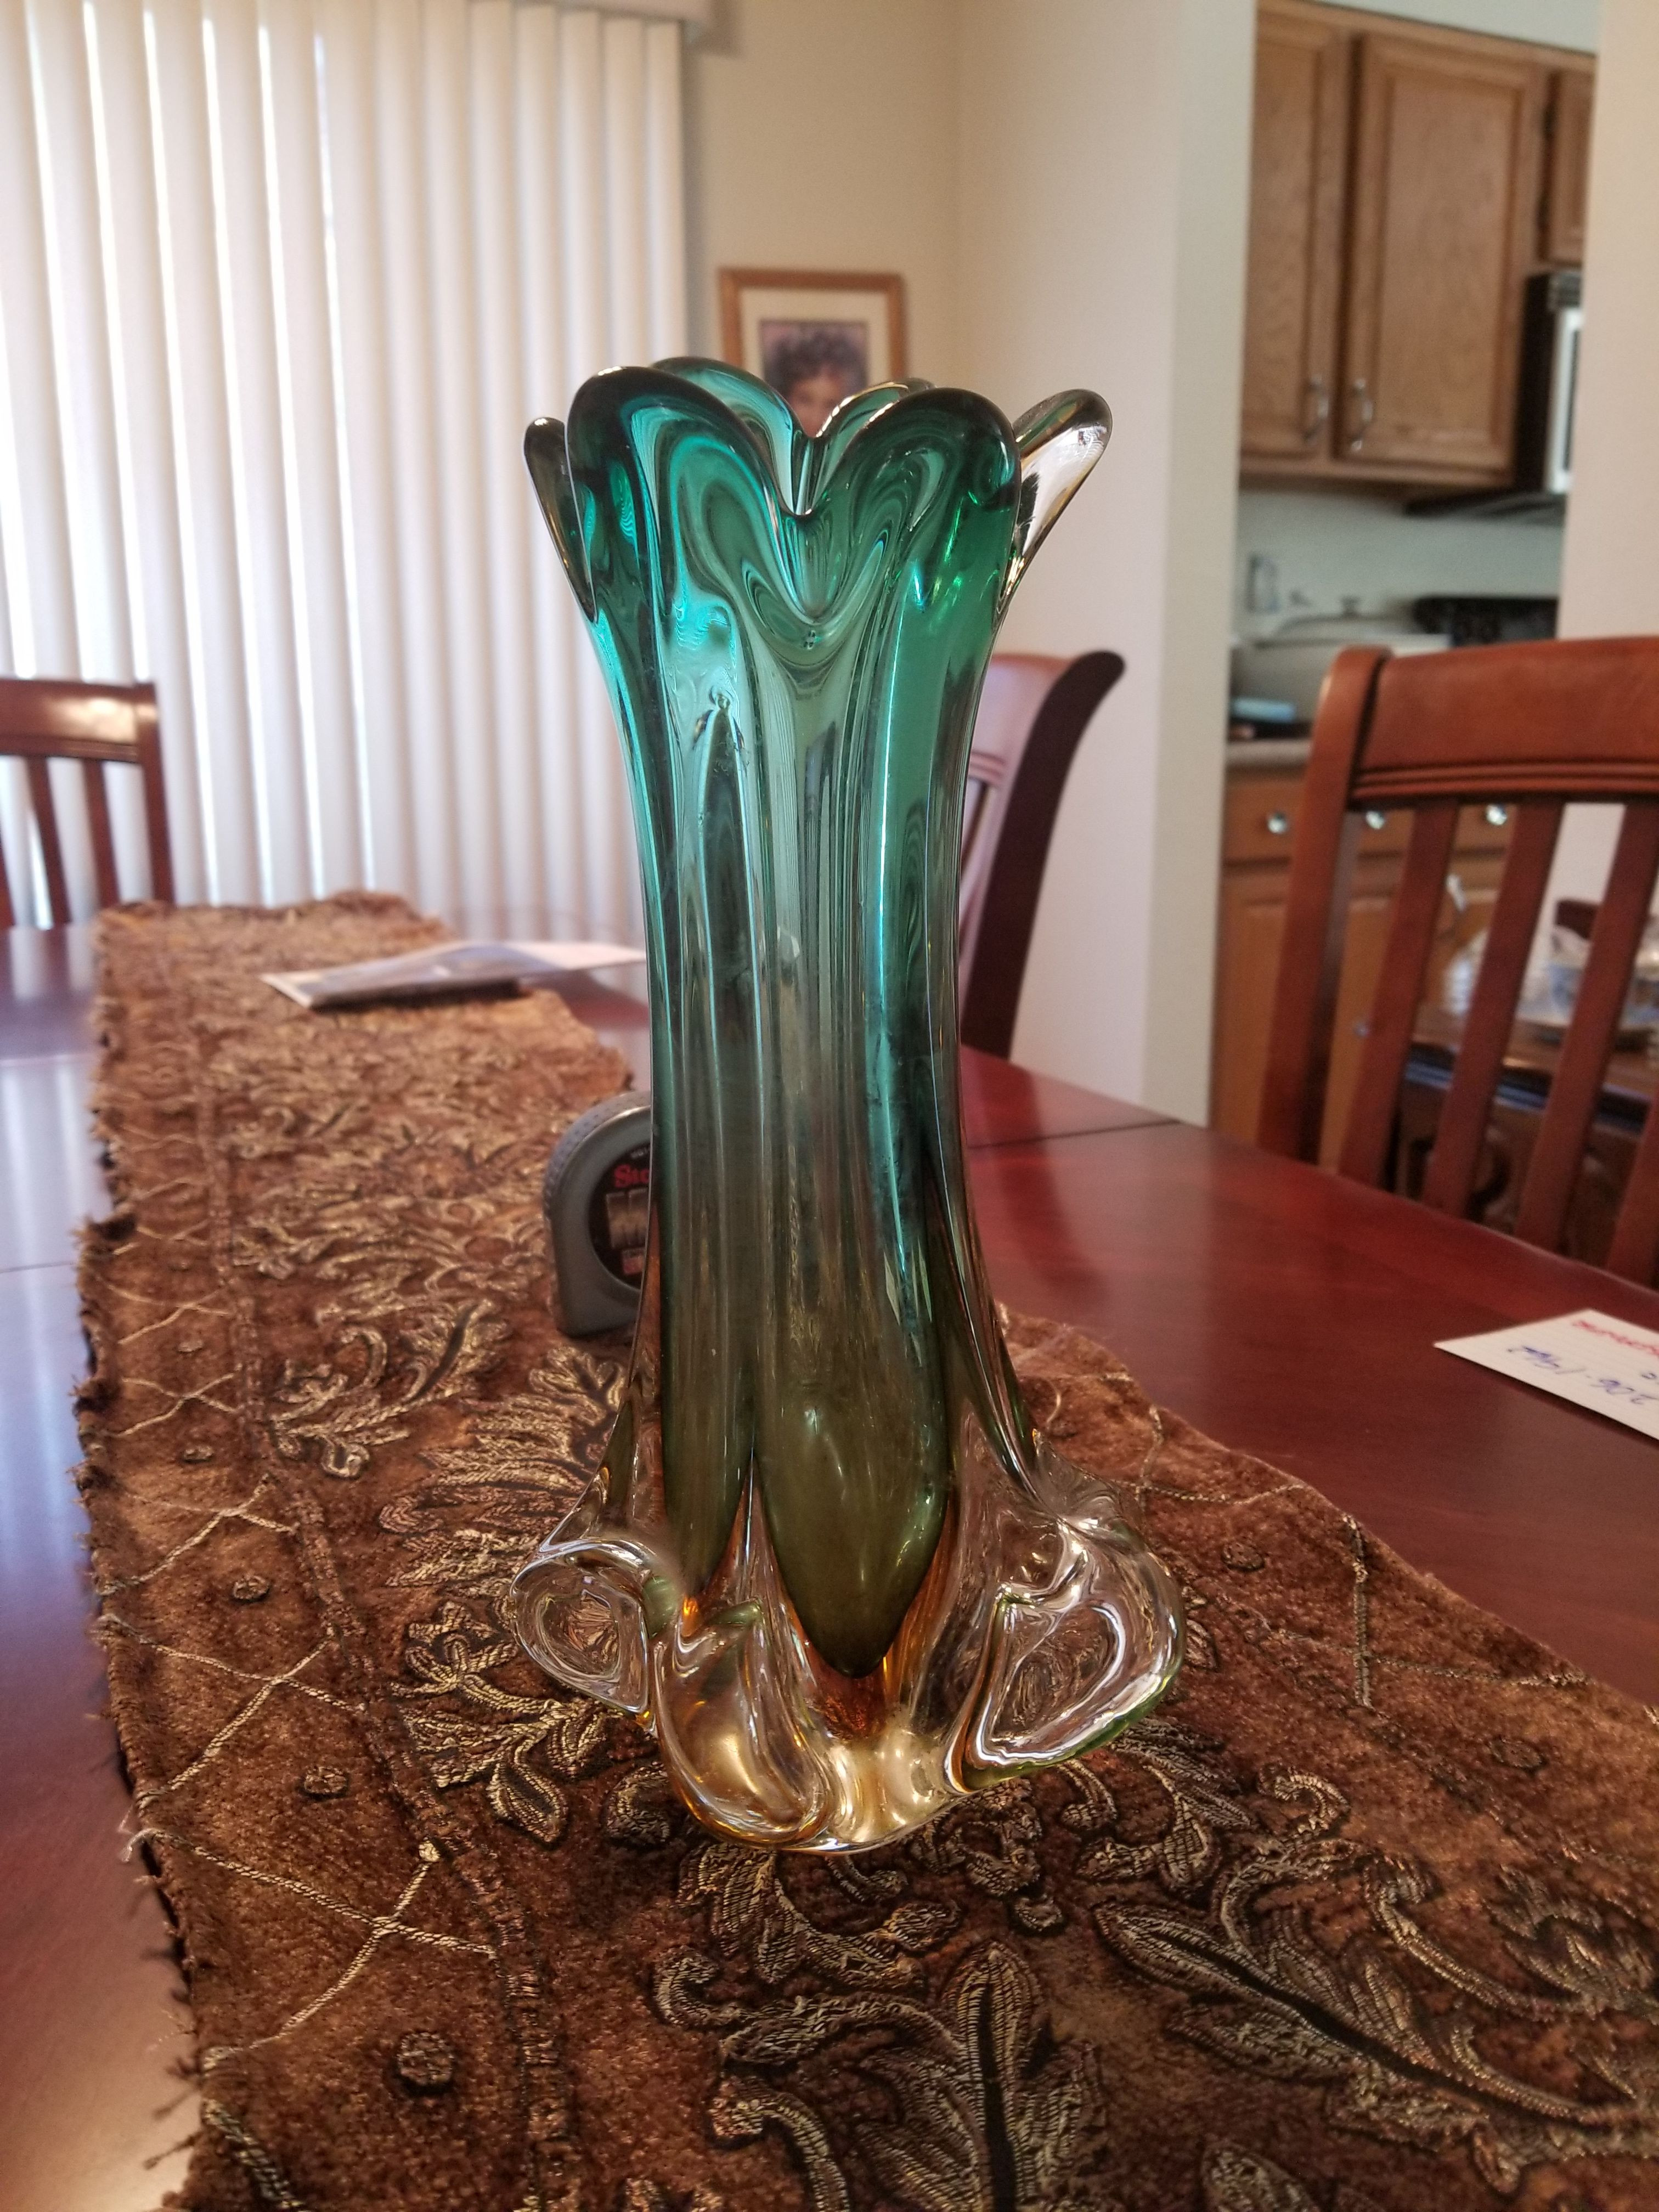 daum nancy vase for sale of what is the value of this vase it is approximately 11 high and intended for 20180517 132000